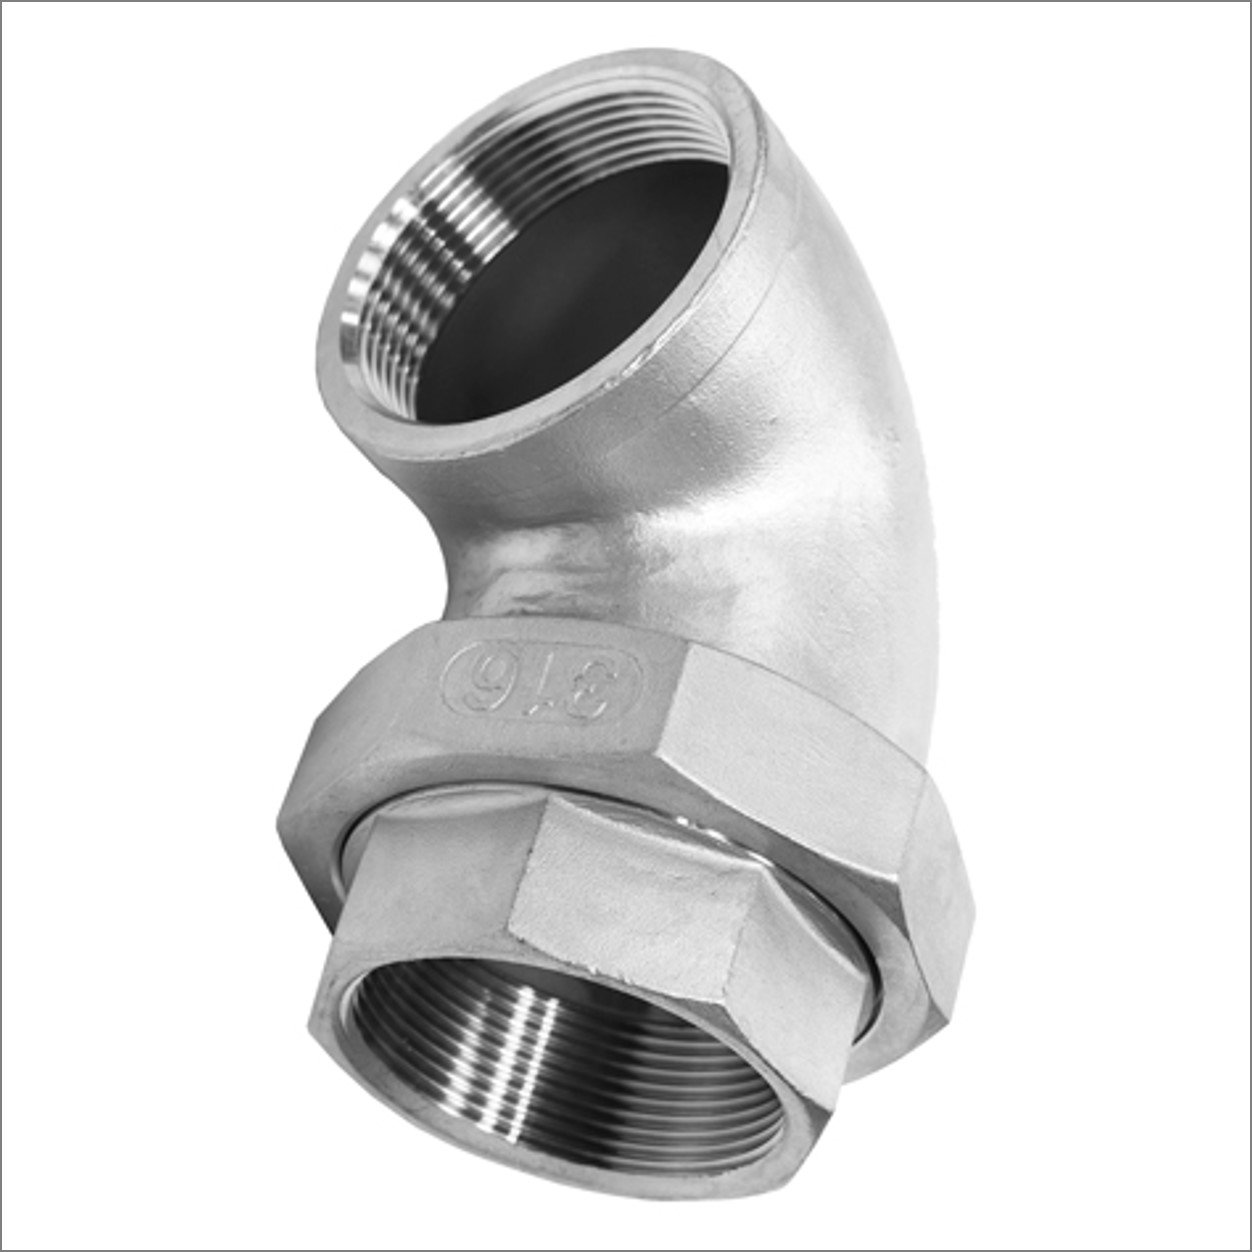 stainless-steel-elbow-union-cone-seat-bsp